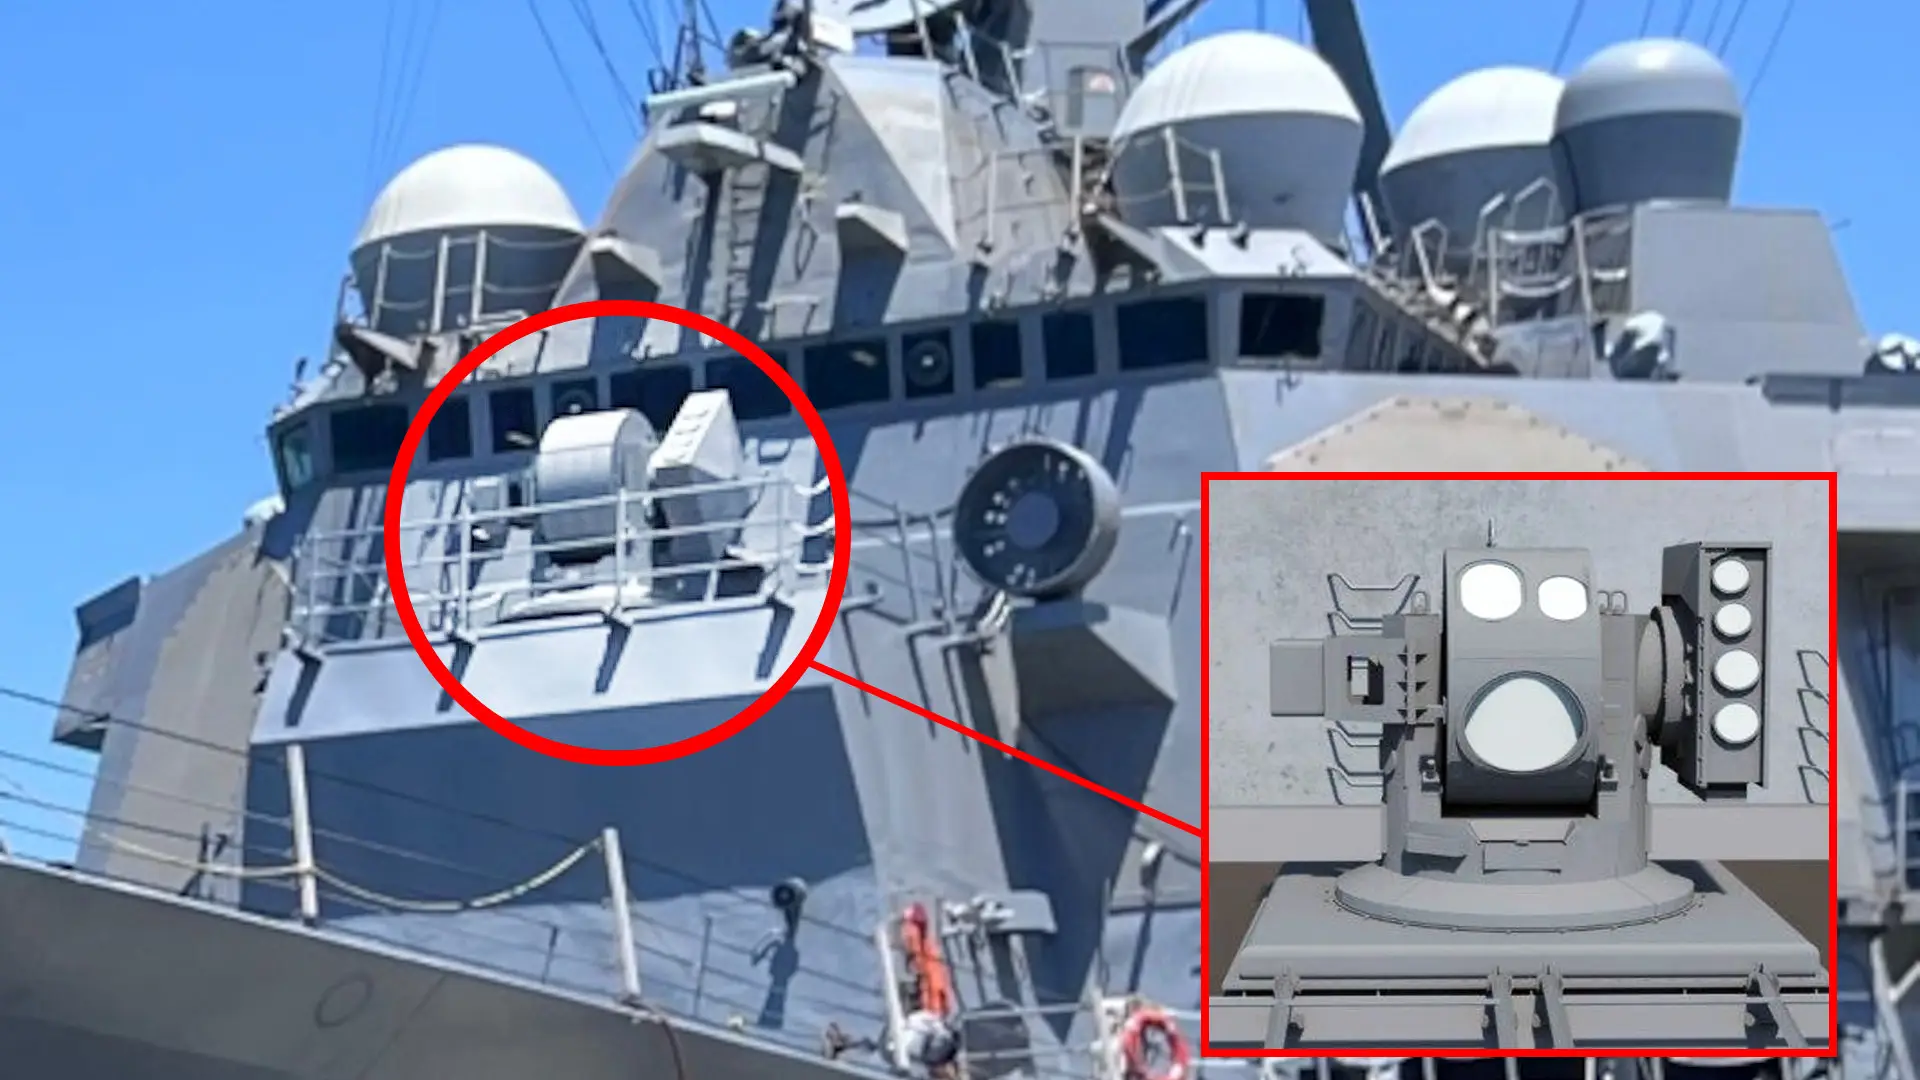 US Navy shows USS Preble destroyer with HELIOS laser weapon - Death Star replaces Vulcan cannon